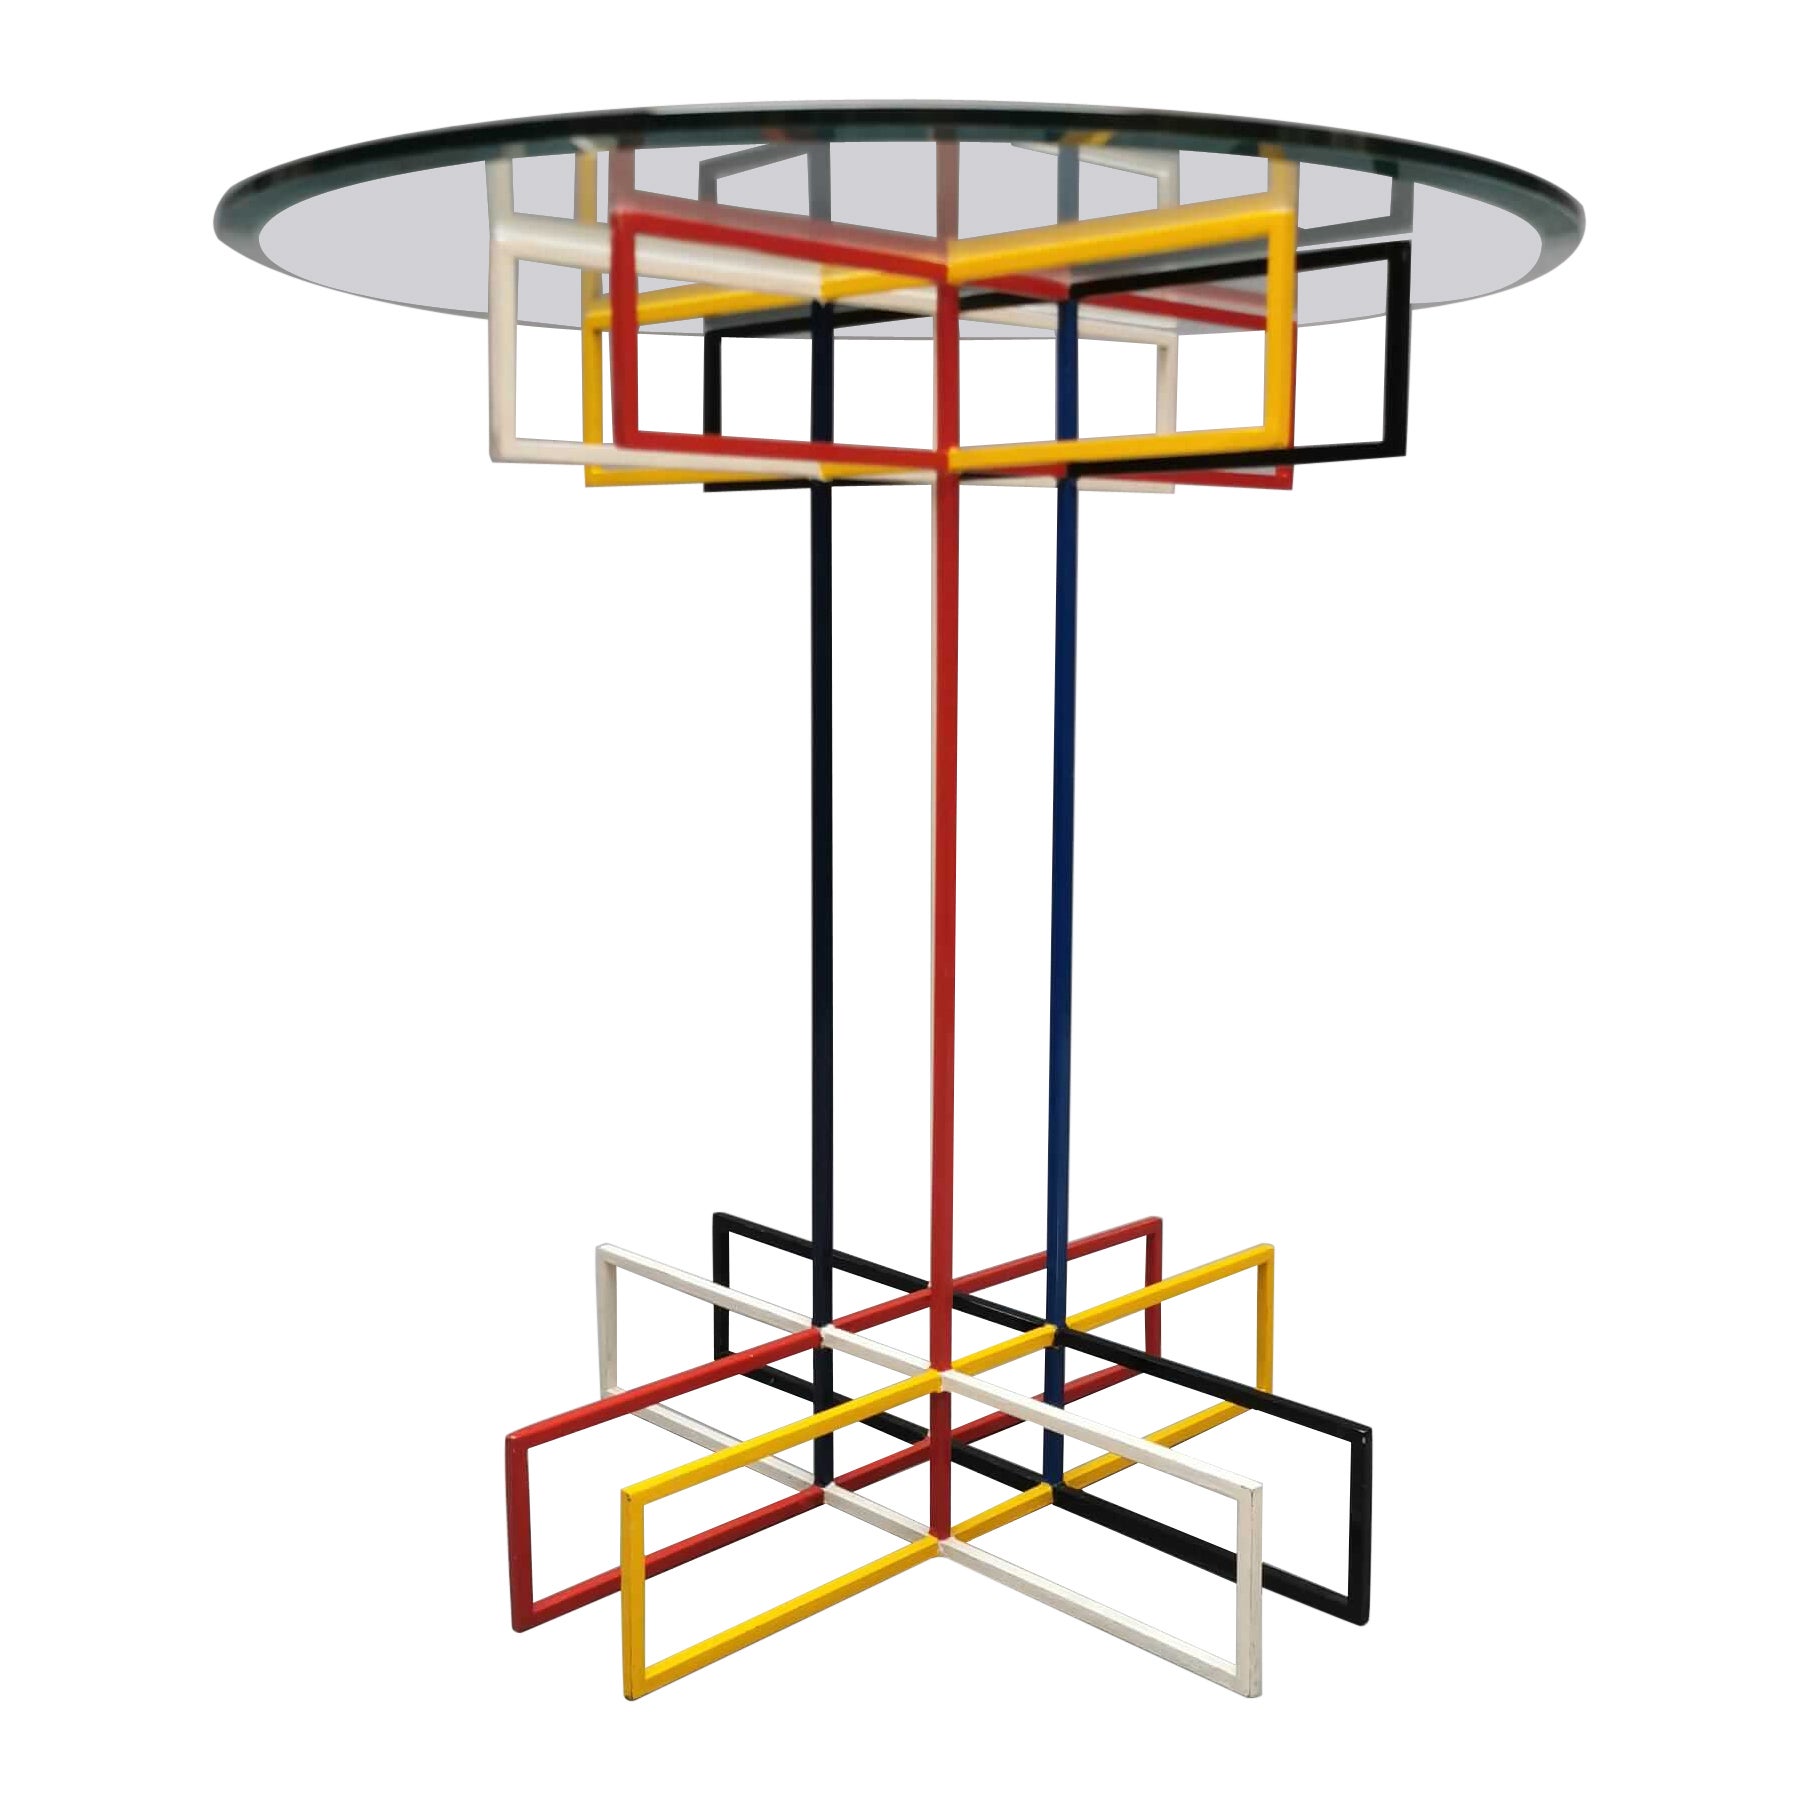 Mondrian Style Table For Sale